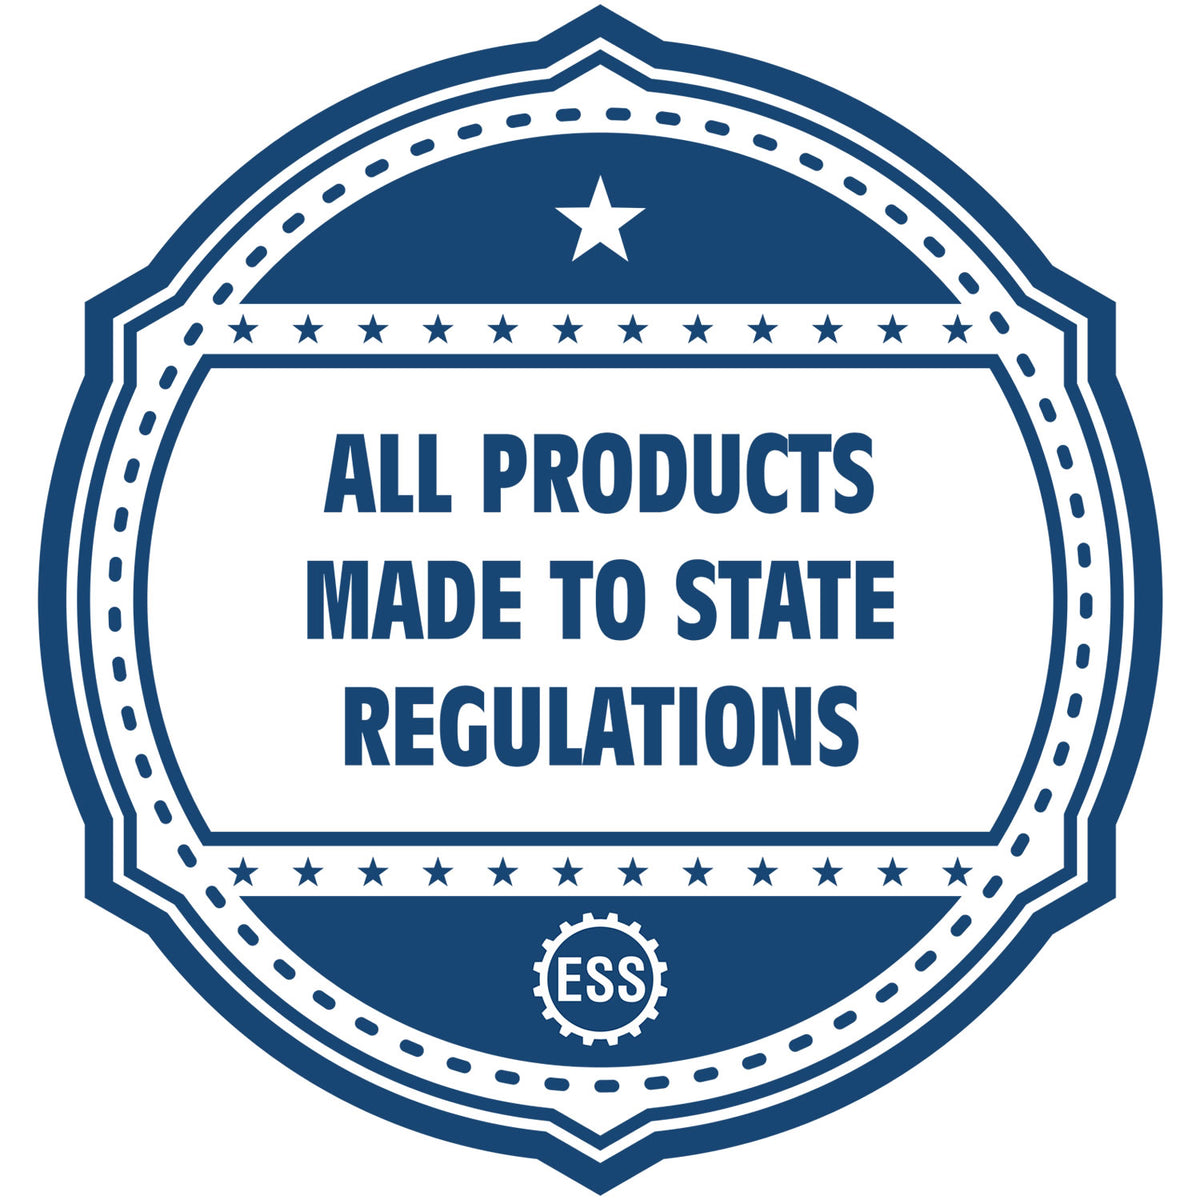 An icon or badge element for the State of Indiana Extended Long Reach Engineer Seal showing that this product is made in compliance with state regulations.